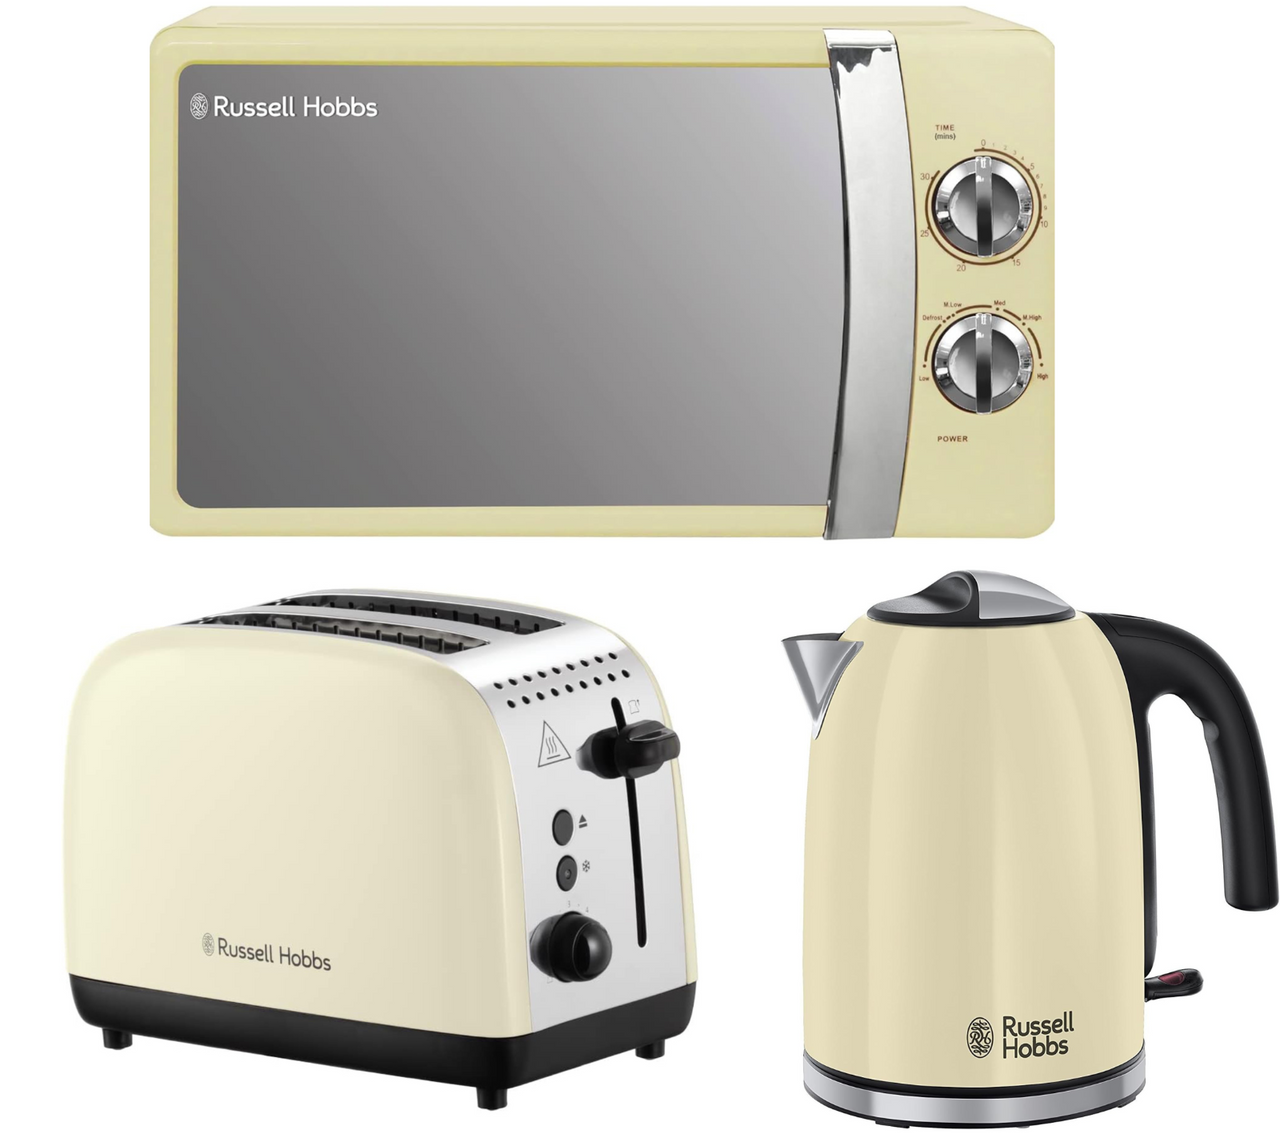 Russell Hobbs Colours Plus 1.7L Kettle, 2 Slice Toaster & 700W Manual Microwave RHMM701C Matching Set in Cream